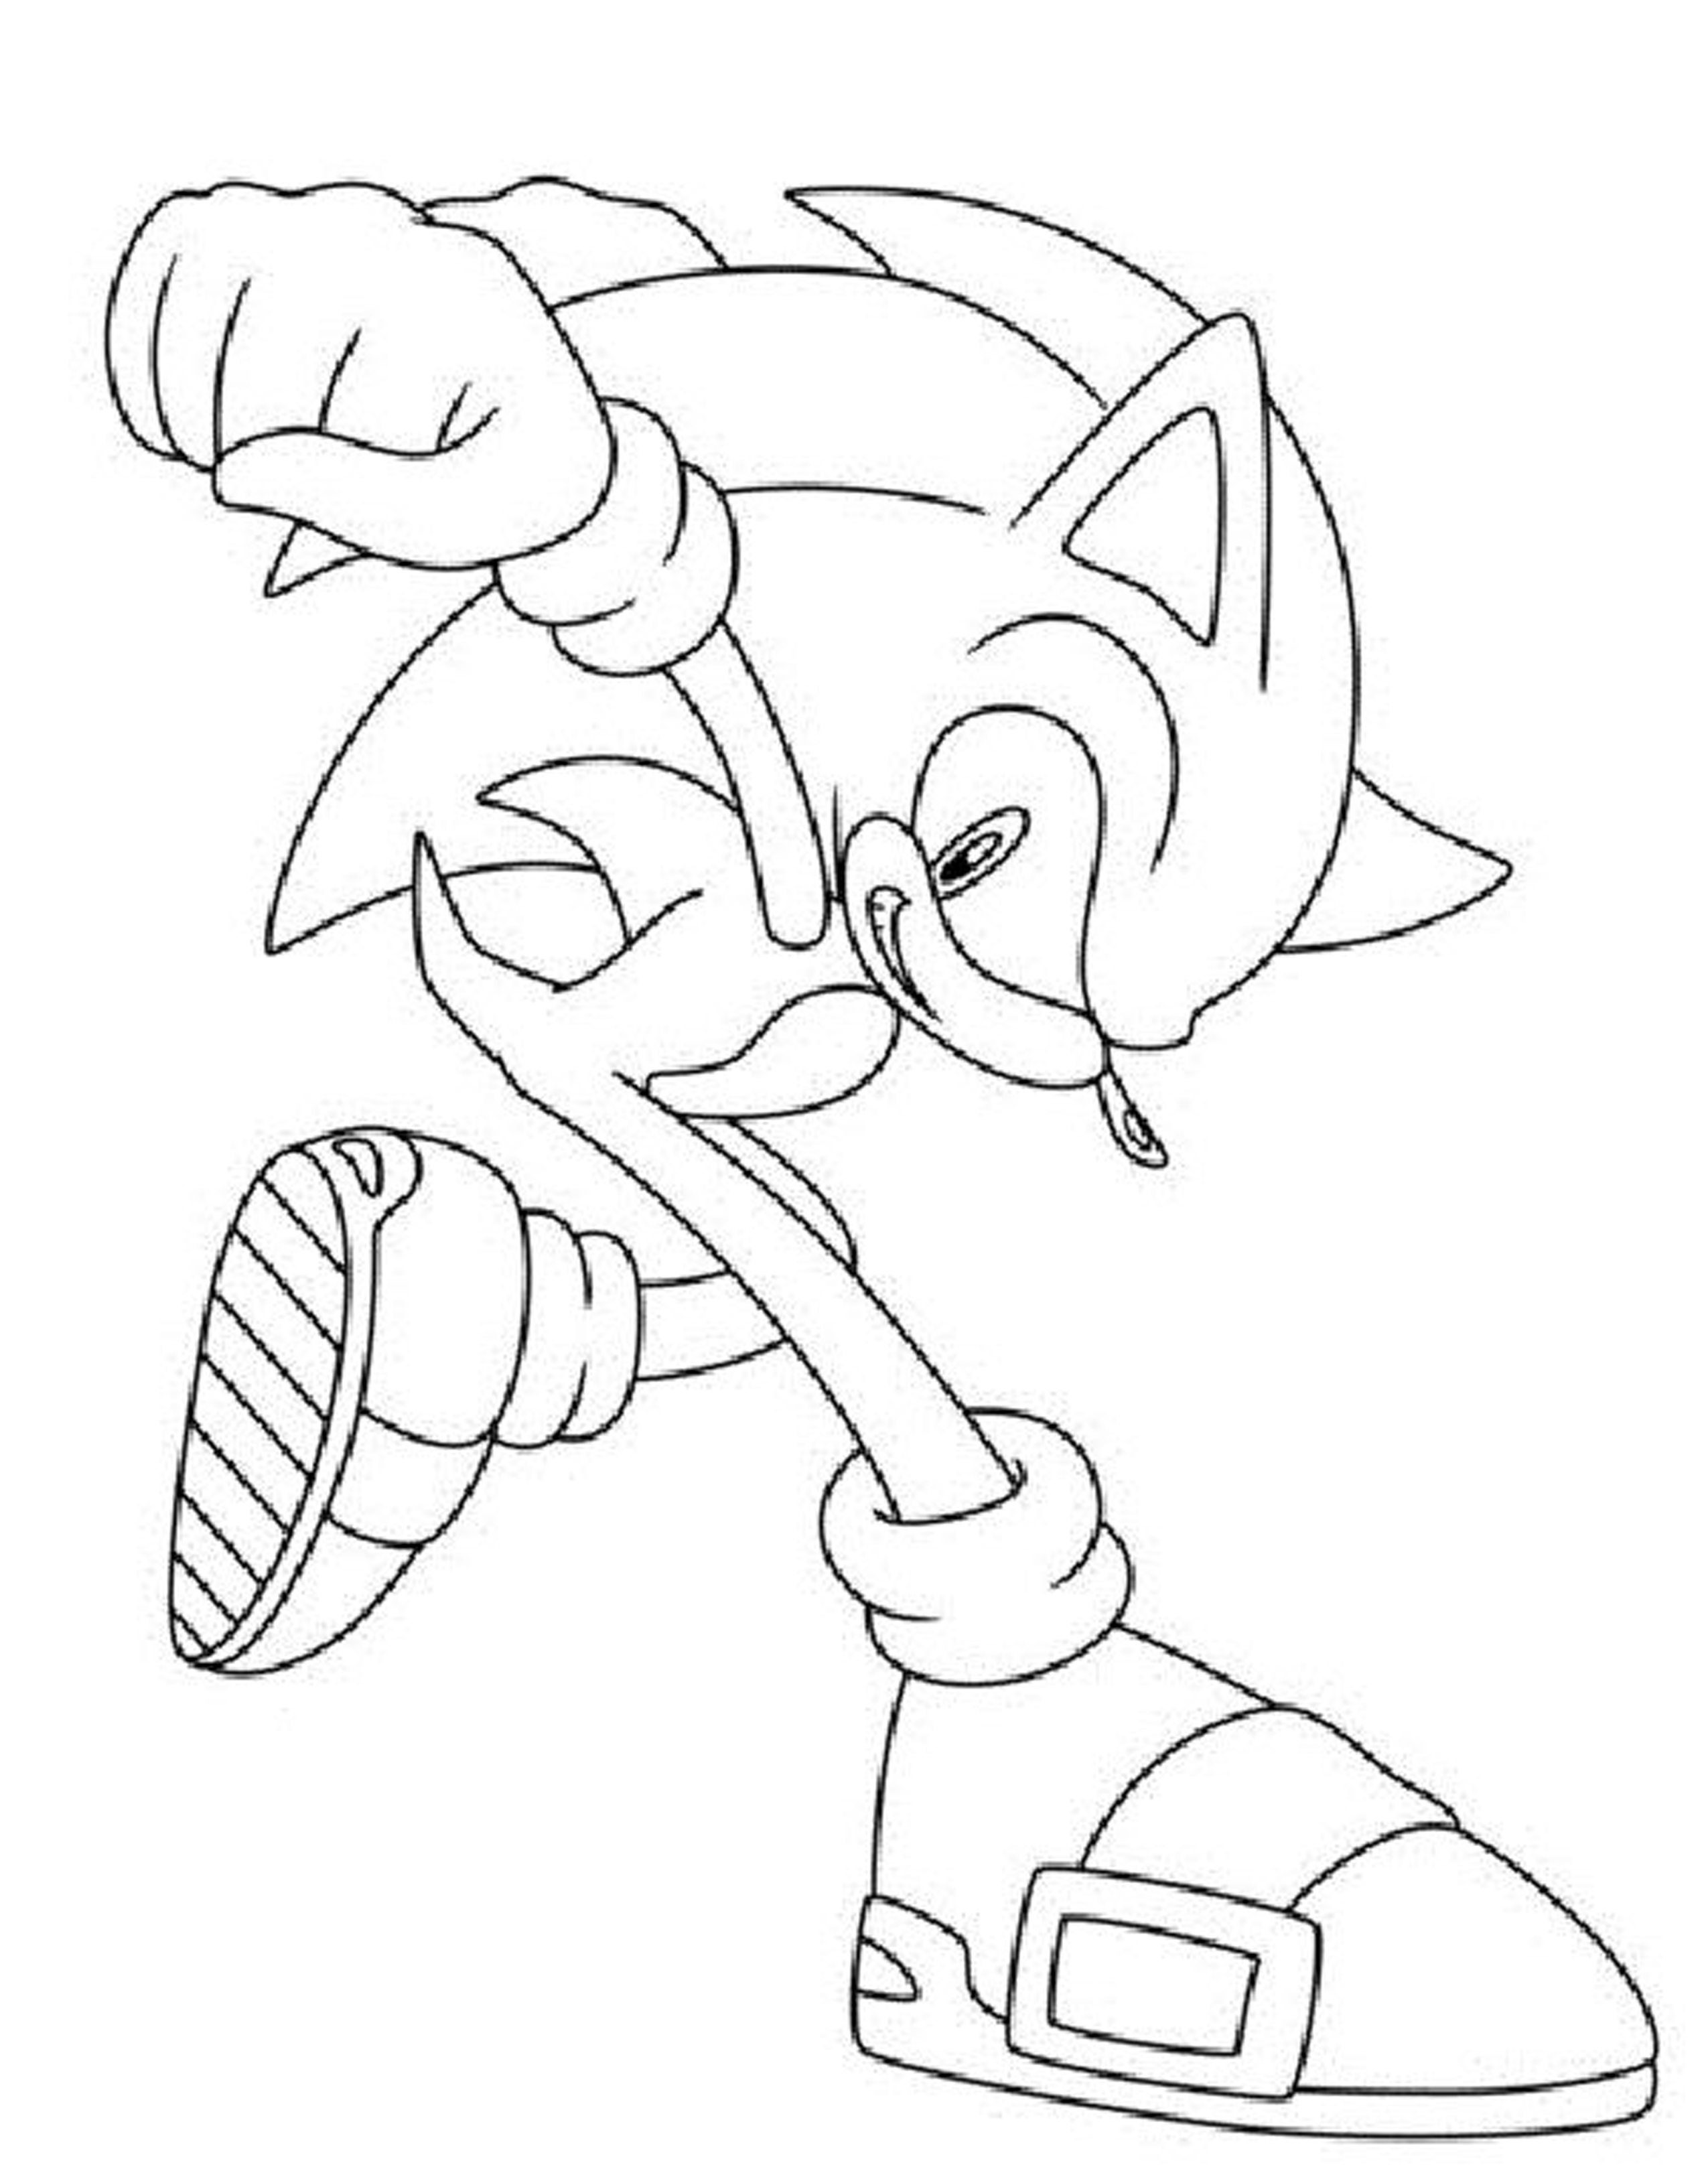 Sonic Coloring Pages Games at GetDrawings | Free download